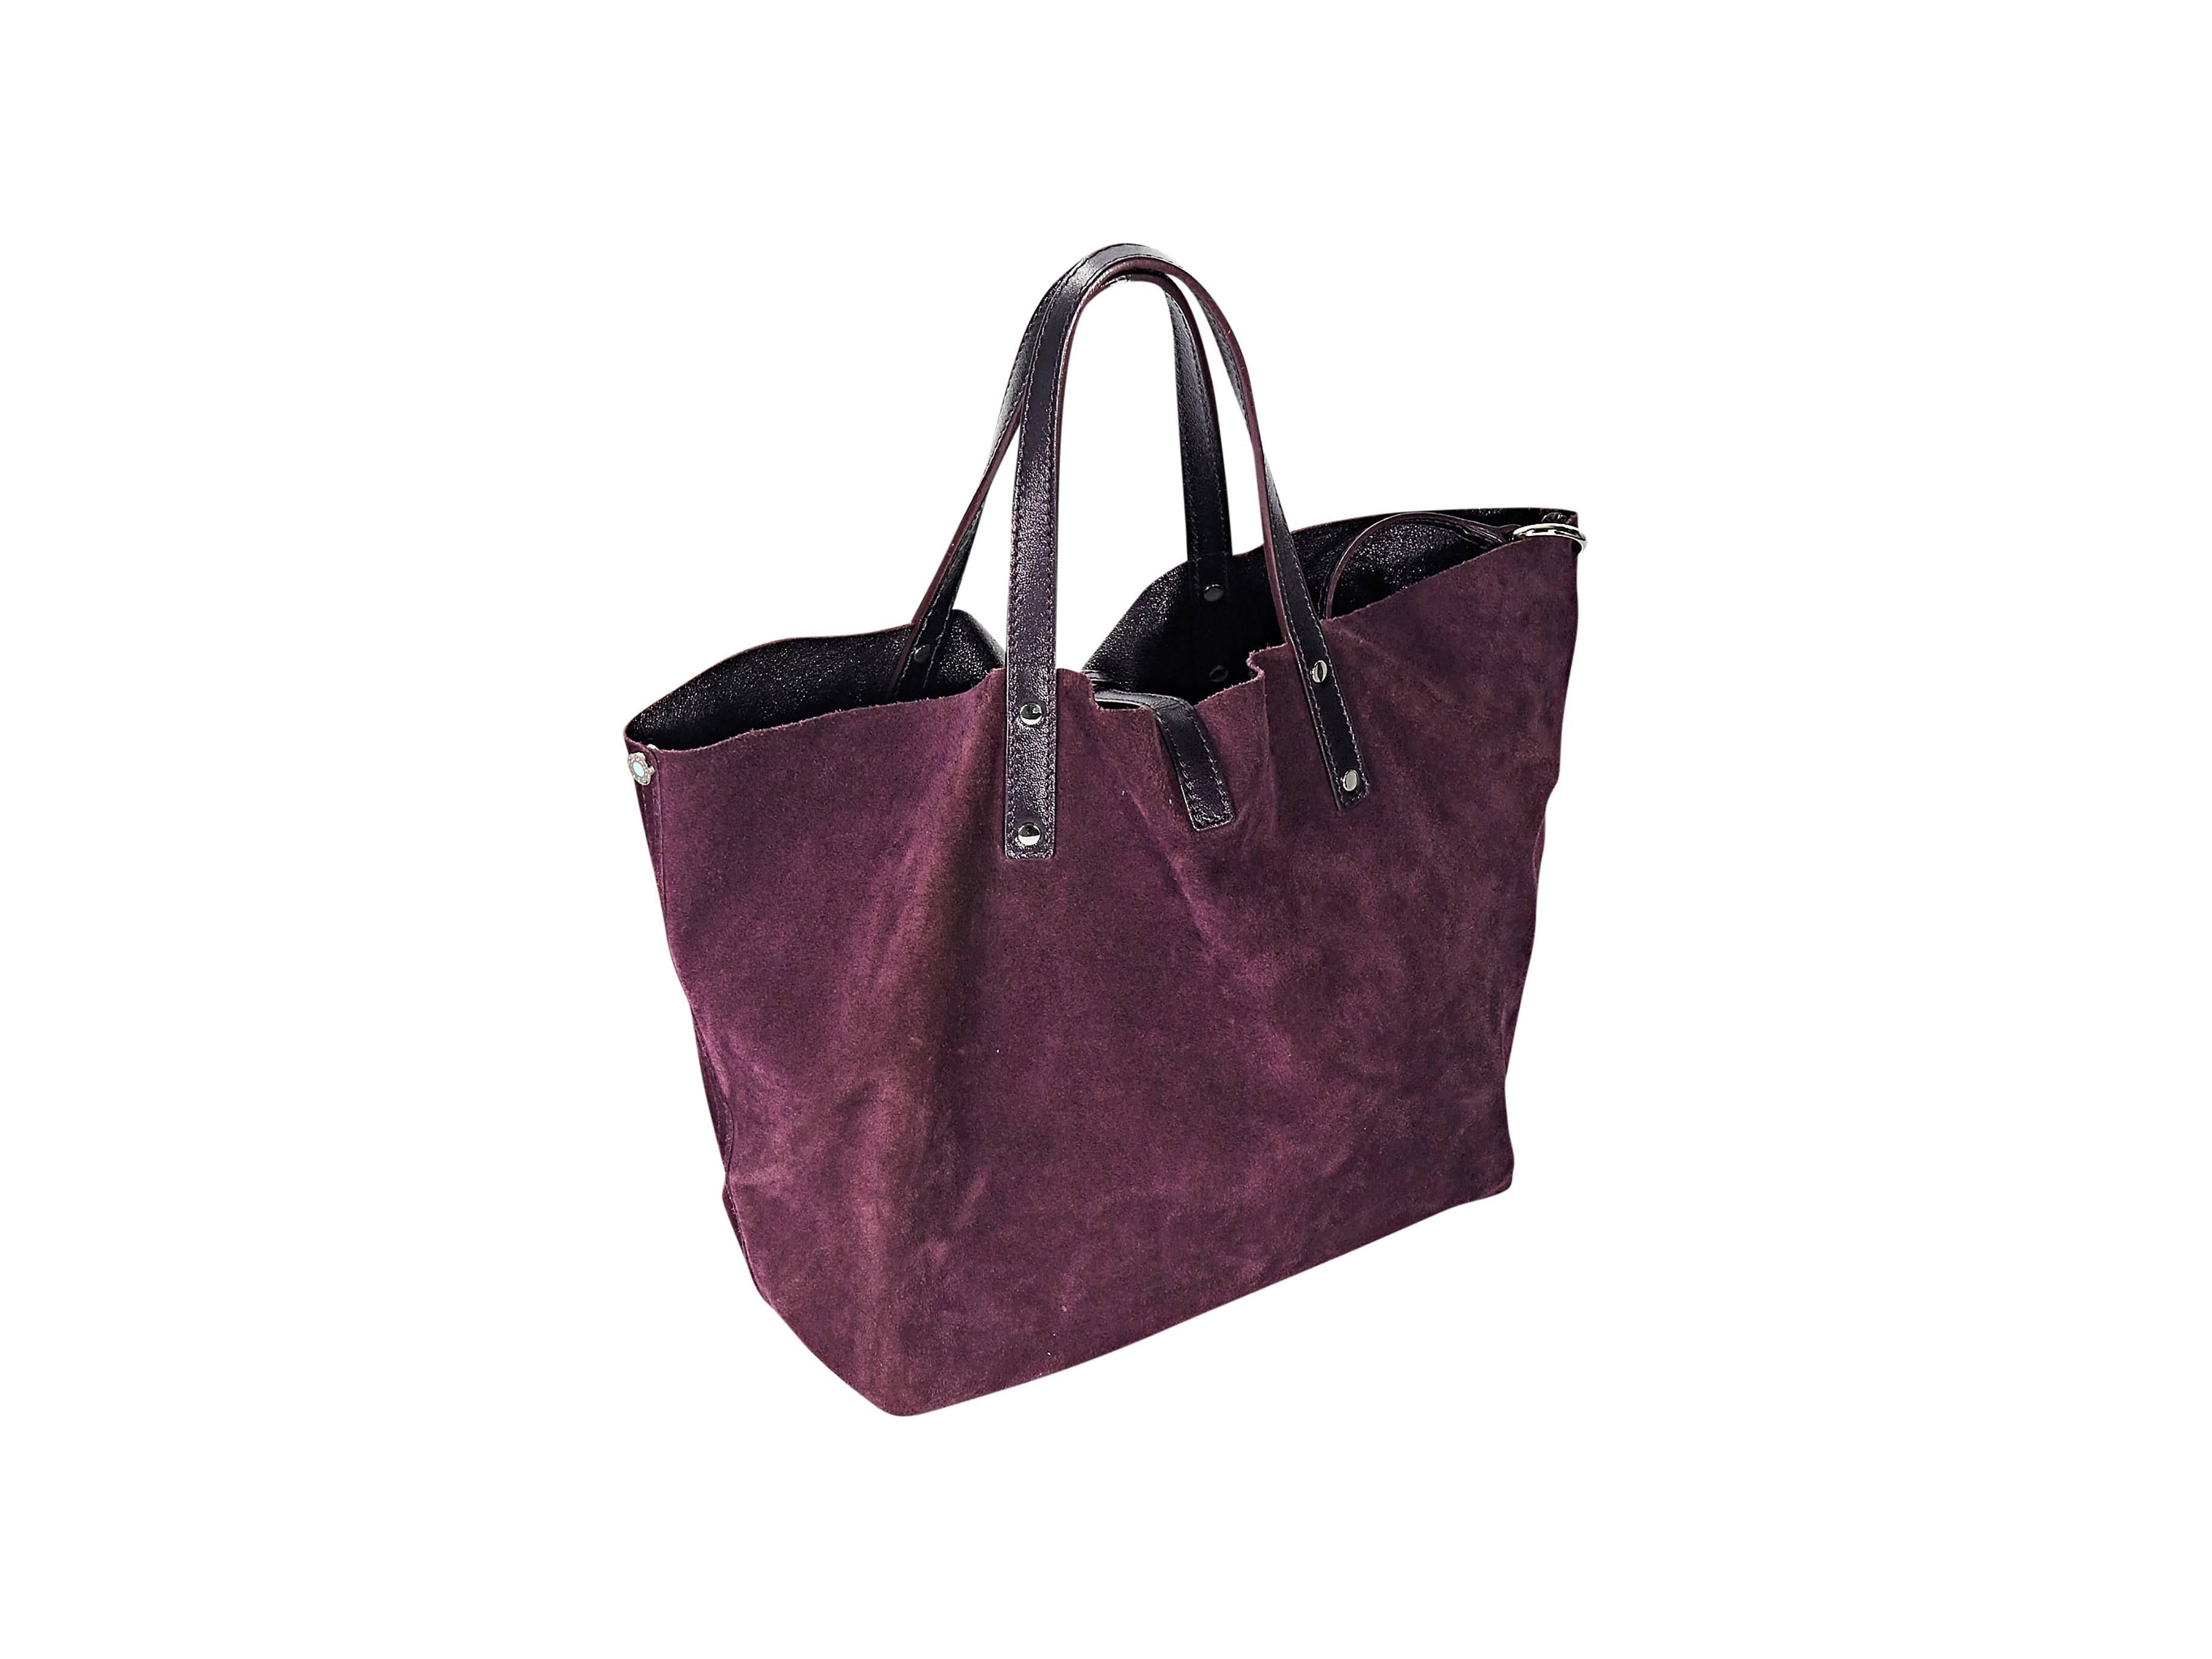 Product details: Burgundy suede and leather reversible tote bag by Tiffany & Co. Dual shoulder straps. Top bridge strap. Interior clasp strap. Protective metal feet. Goldtone hardware. 10